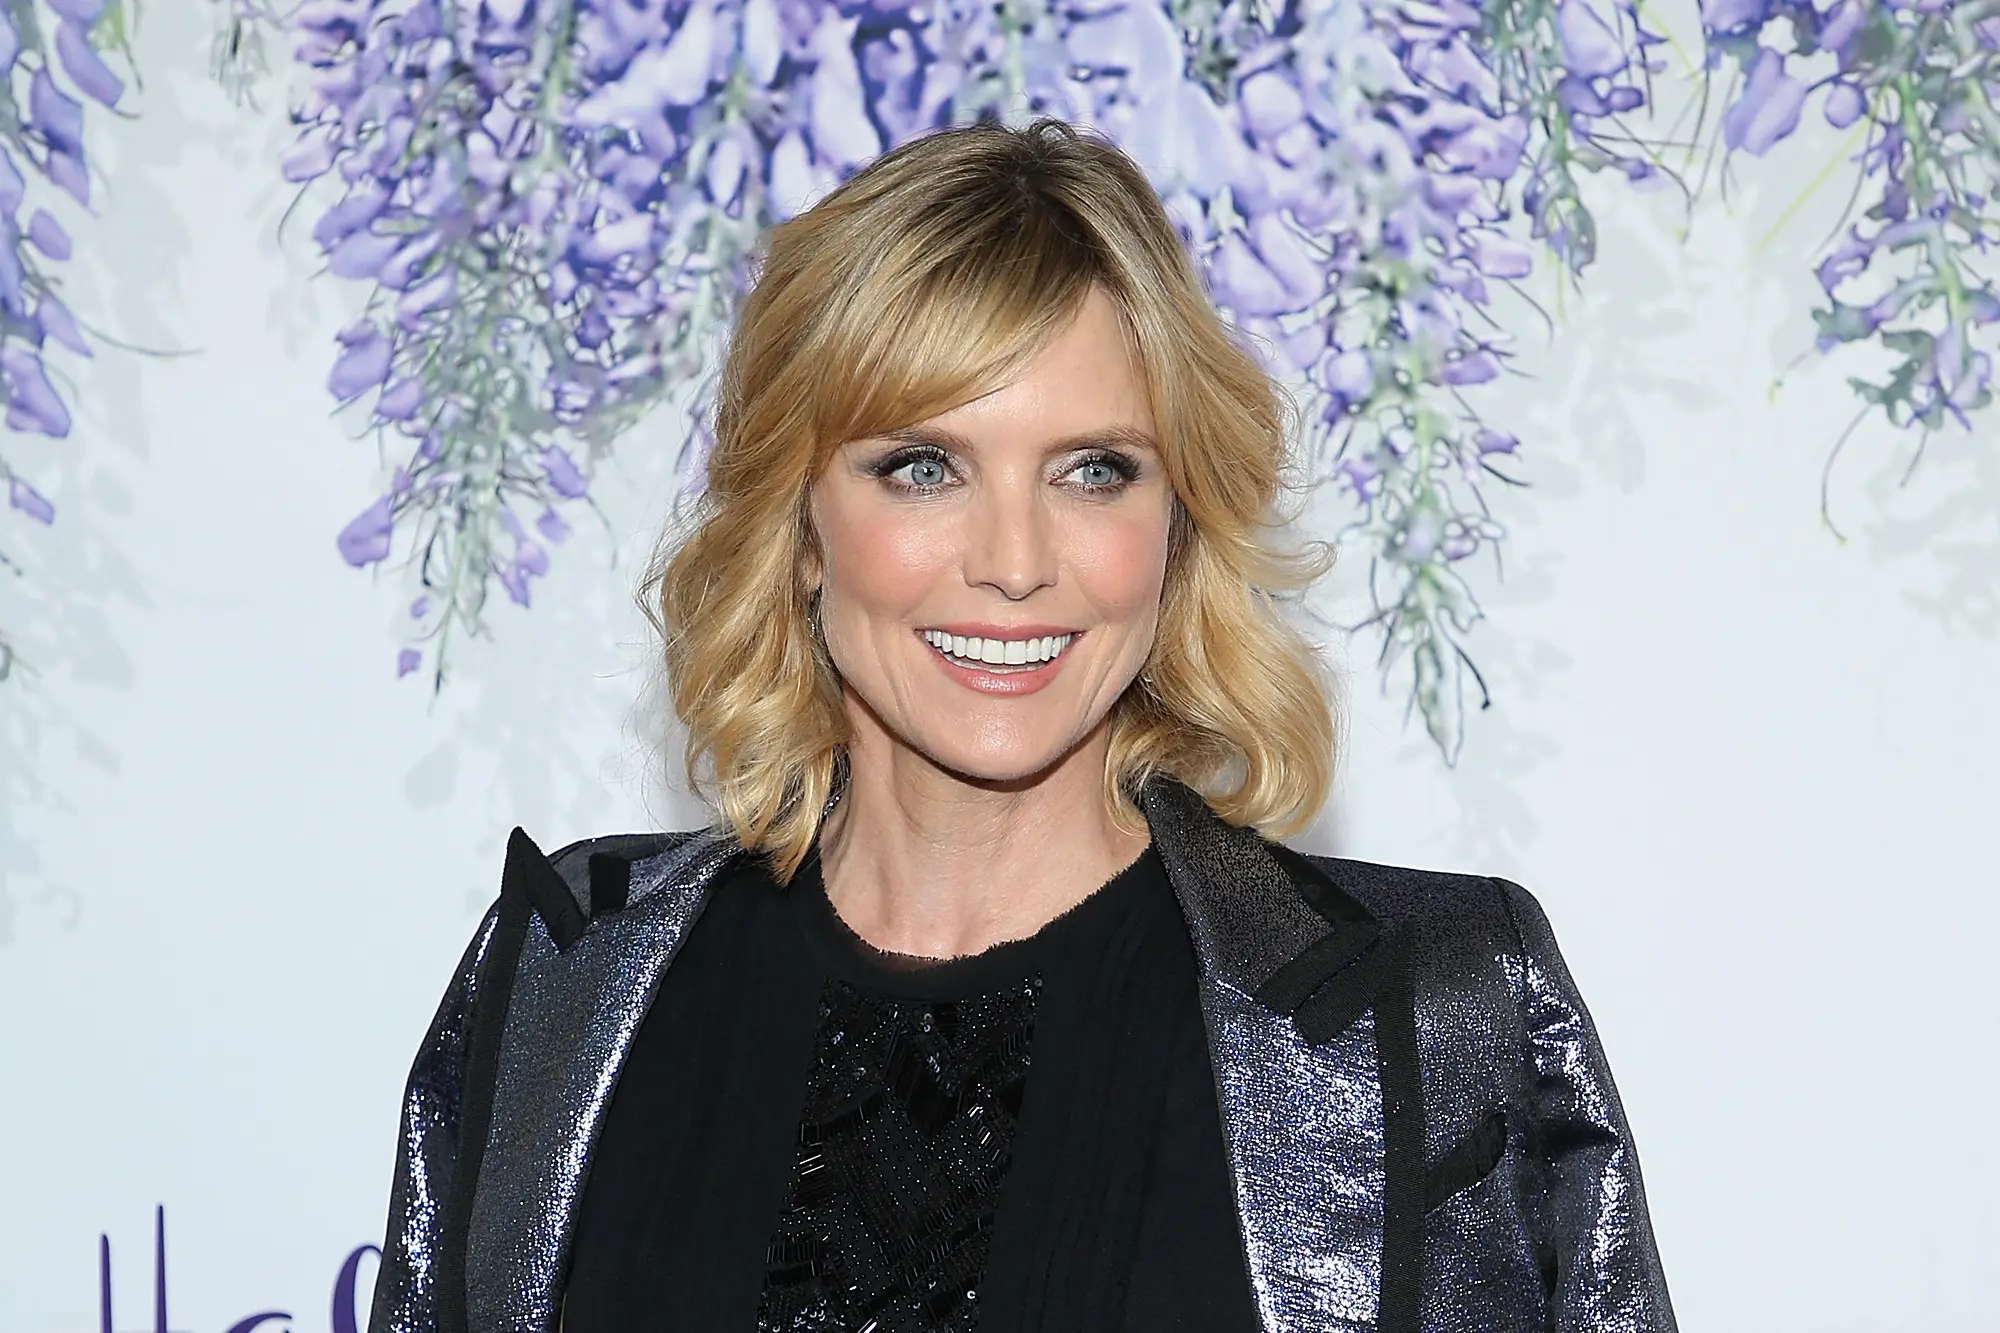 Who Is Courtney Thorne-Smith? Age, Bio, Career And More Of The Actress